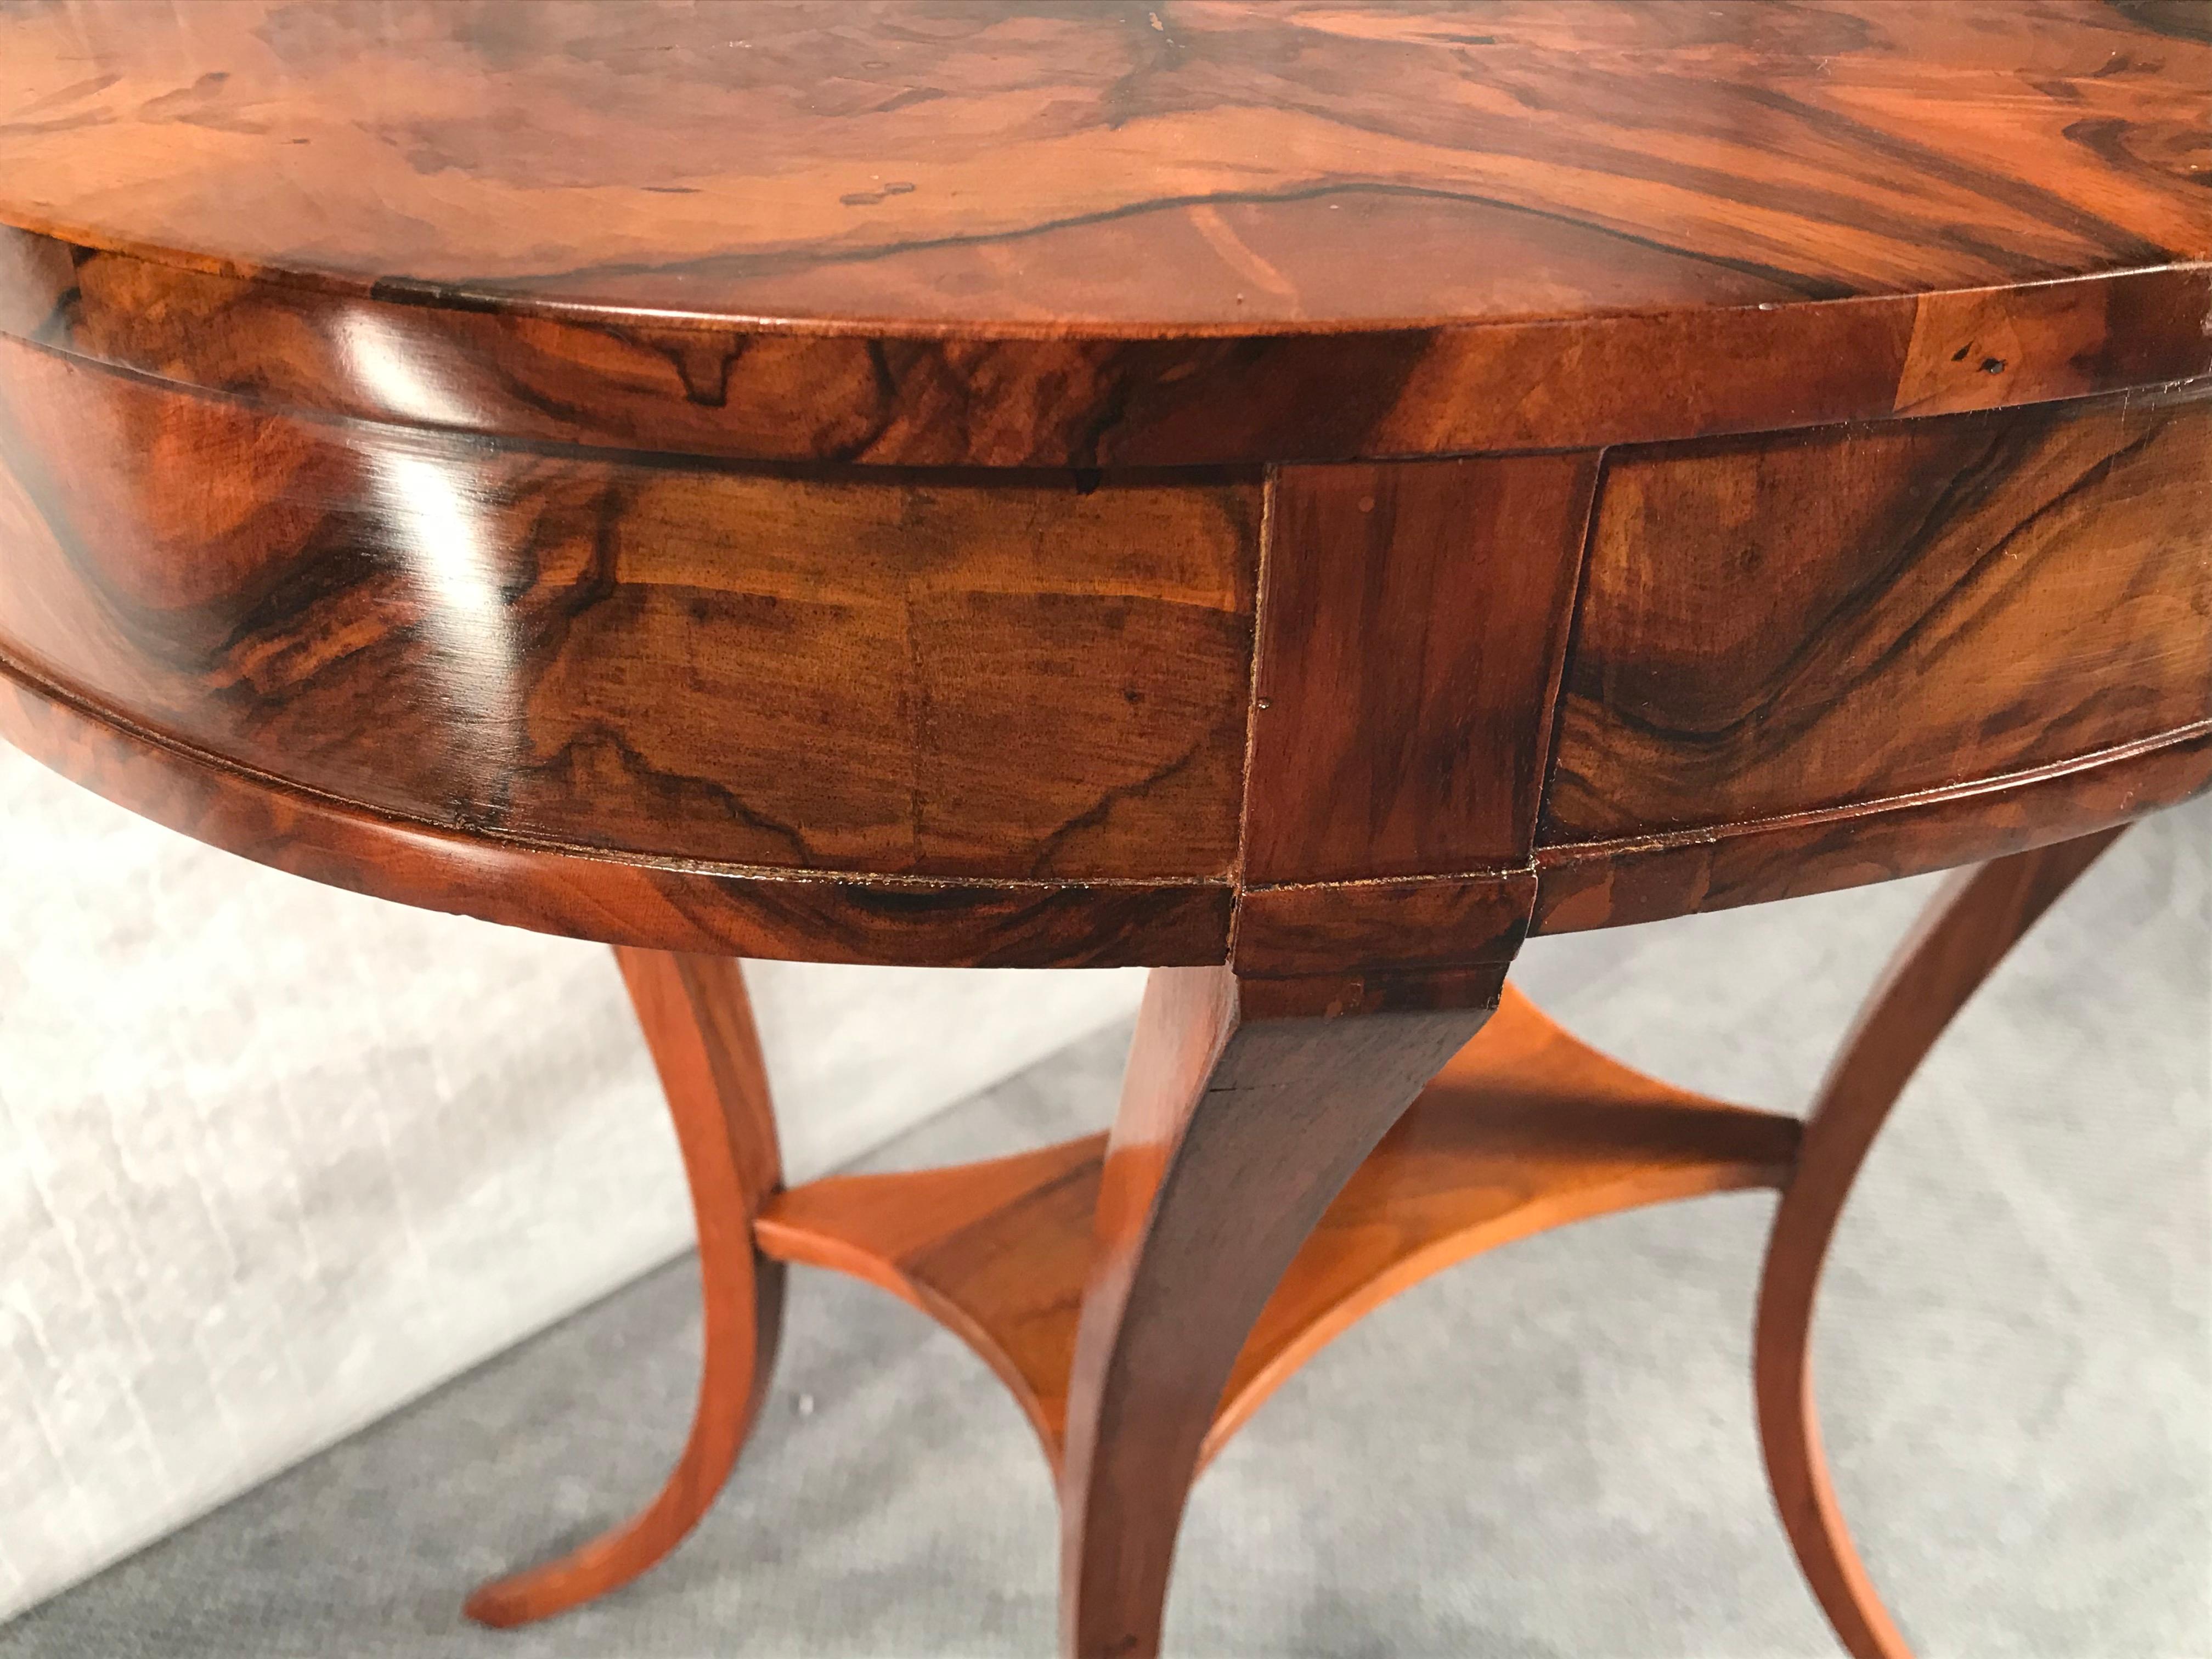 Biedermeier side table, South Germany, 1820.
This oval shaped side table has a beautiful walnut veneer on top and sides.
The table stands on four slender bowlegs and has one smaller shelf in the middle.
The side table has one central drawer. The